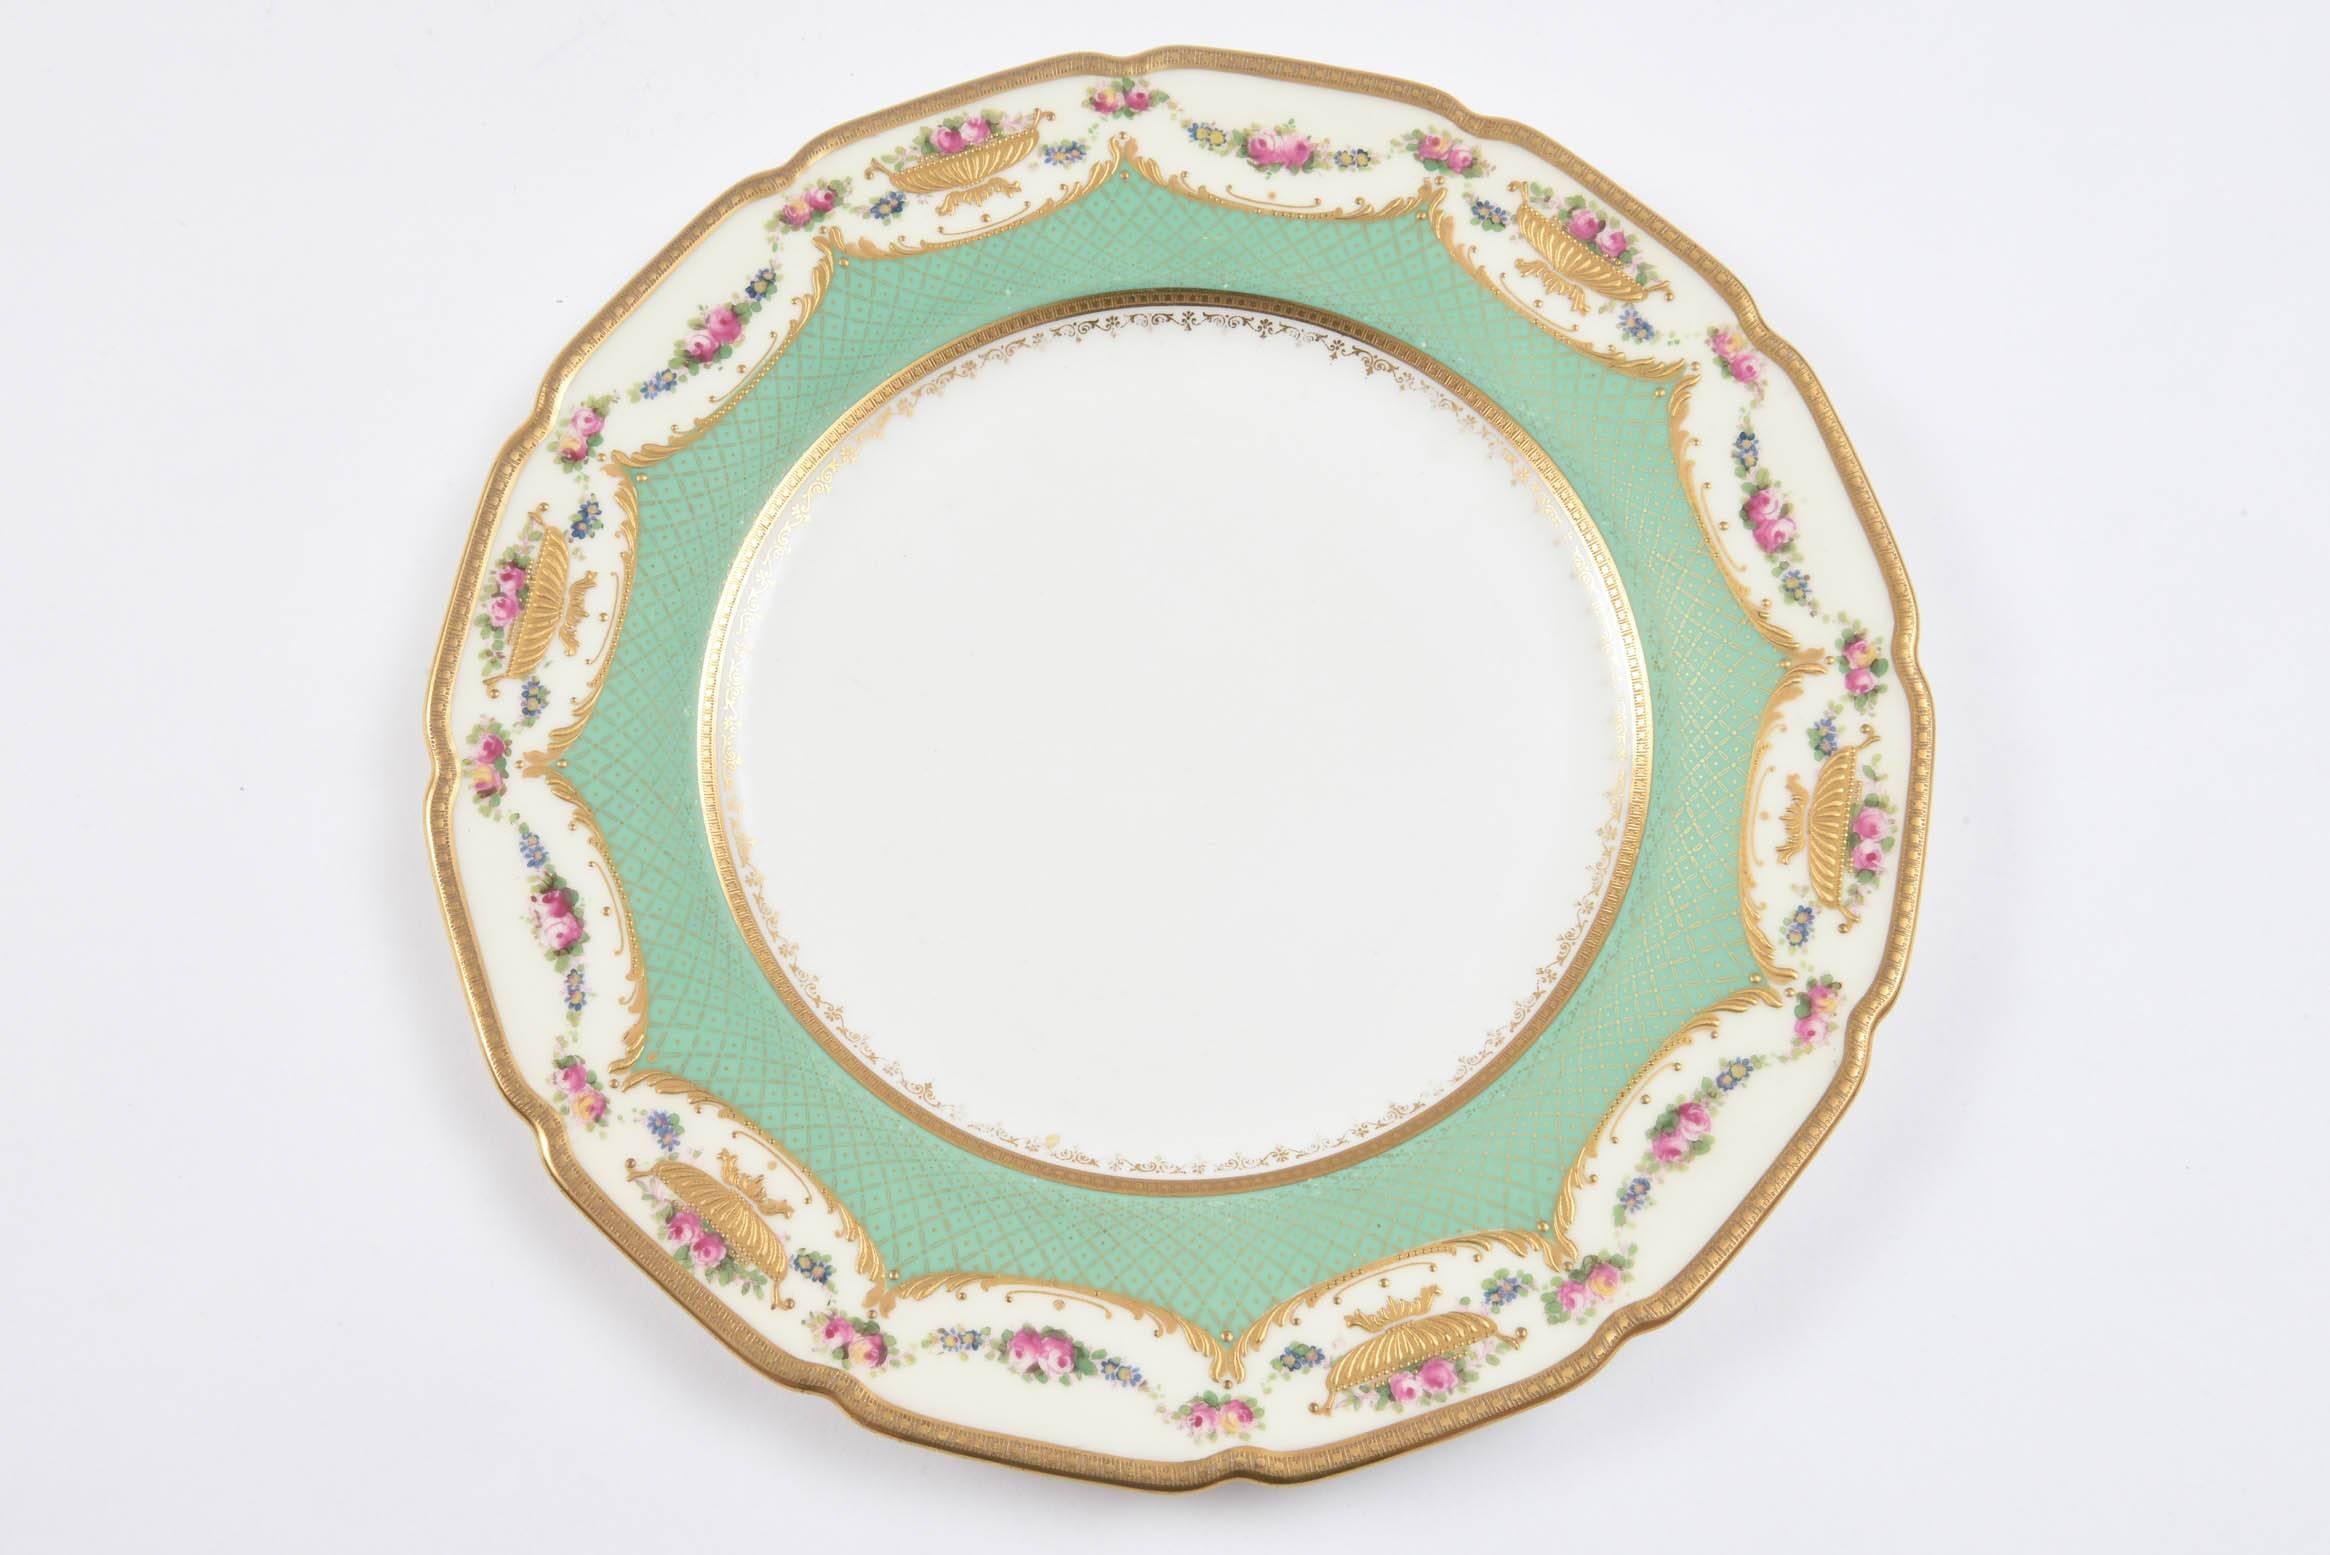 Another classic set of antique English dinner plates by Royal Doulton, England. These feature a Robert Allen designed shape and pattern. Hand-painted florals with highlights of raised tooled gilding in a shaped motif on a nice soft green collar.